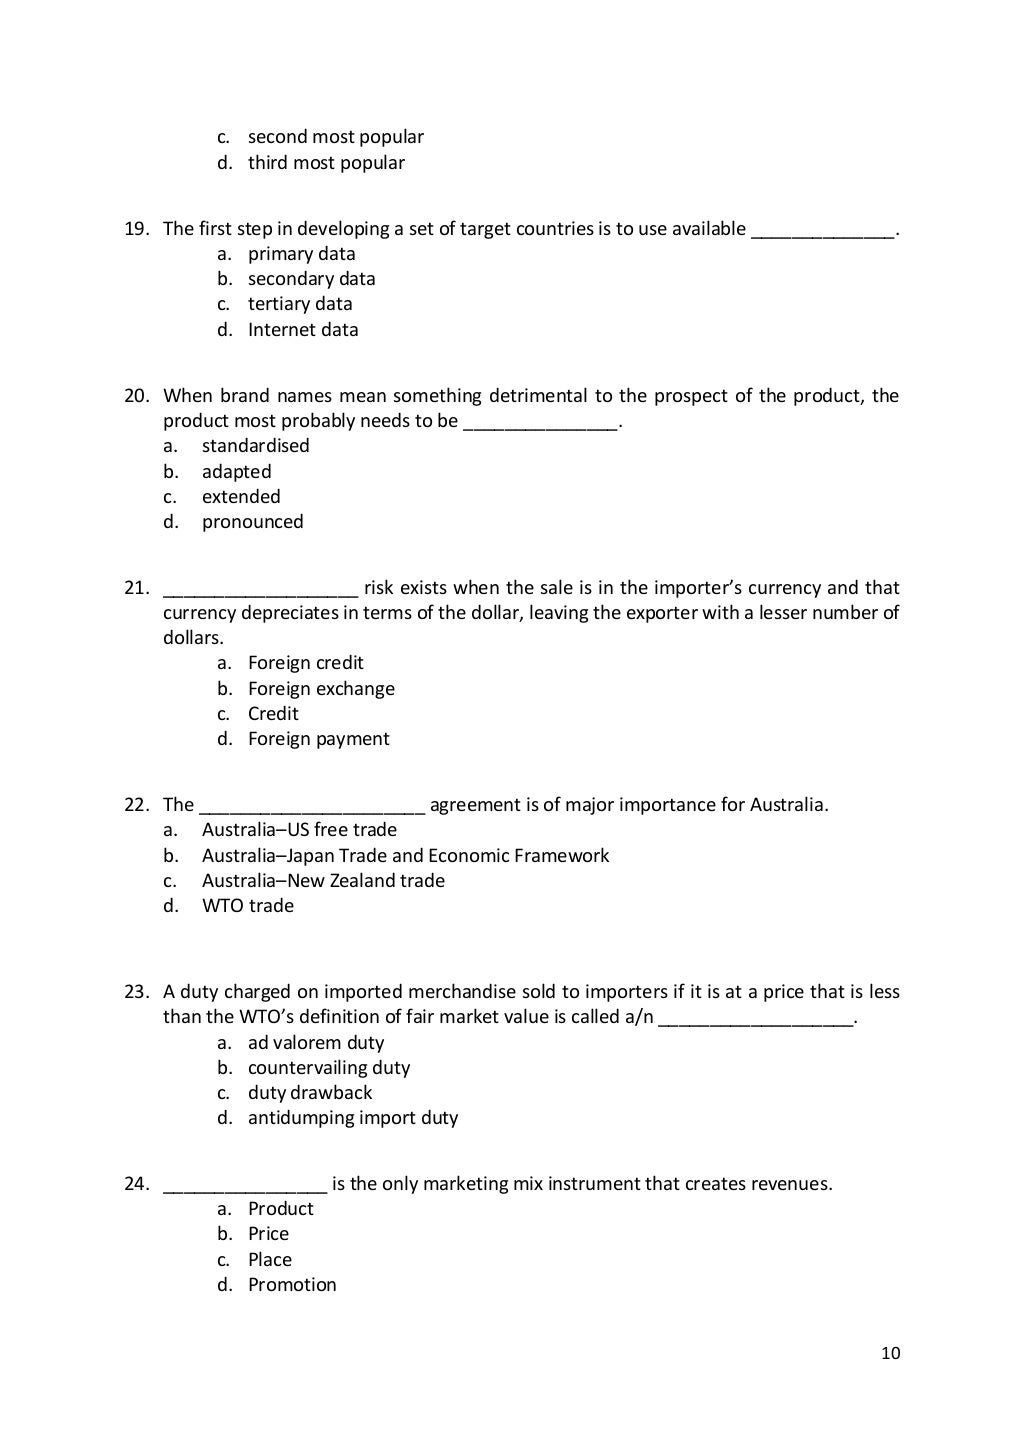 Sample MCQ Practice Questions on International Marketing (April 2014)